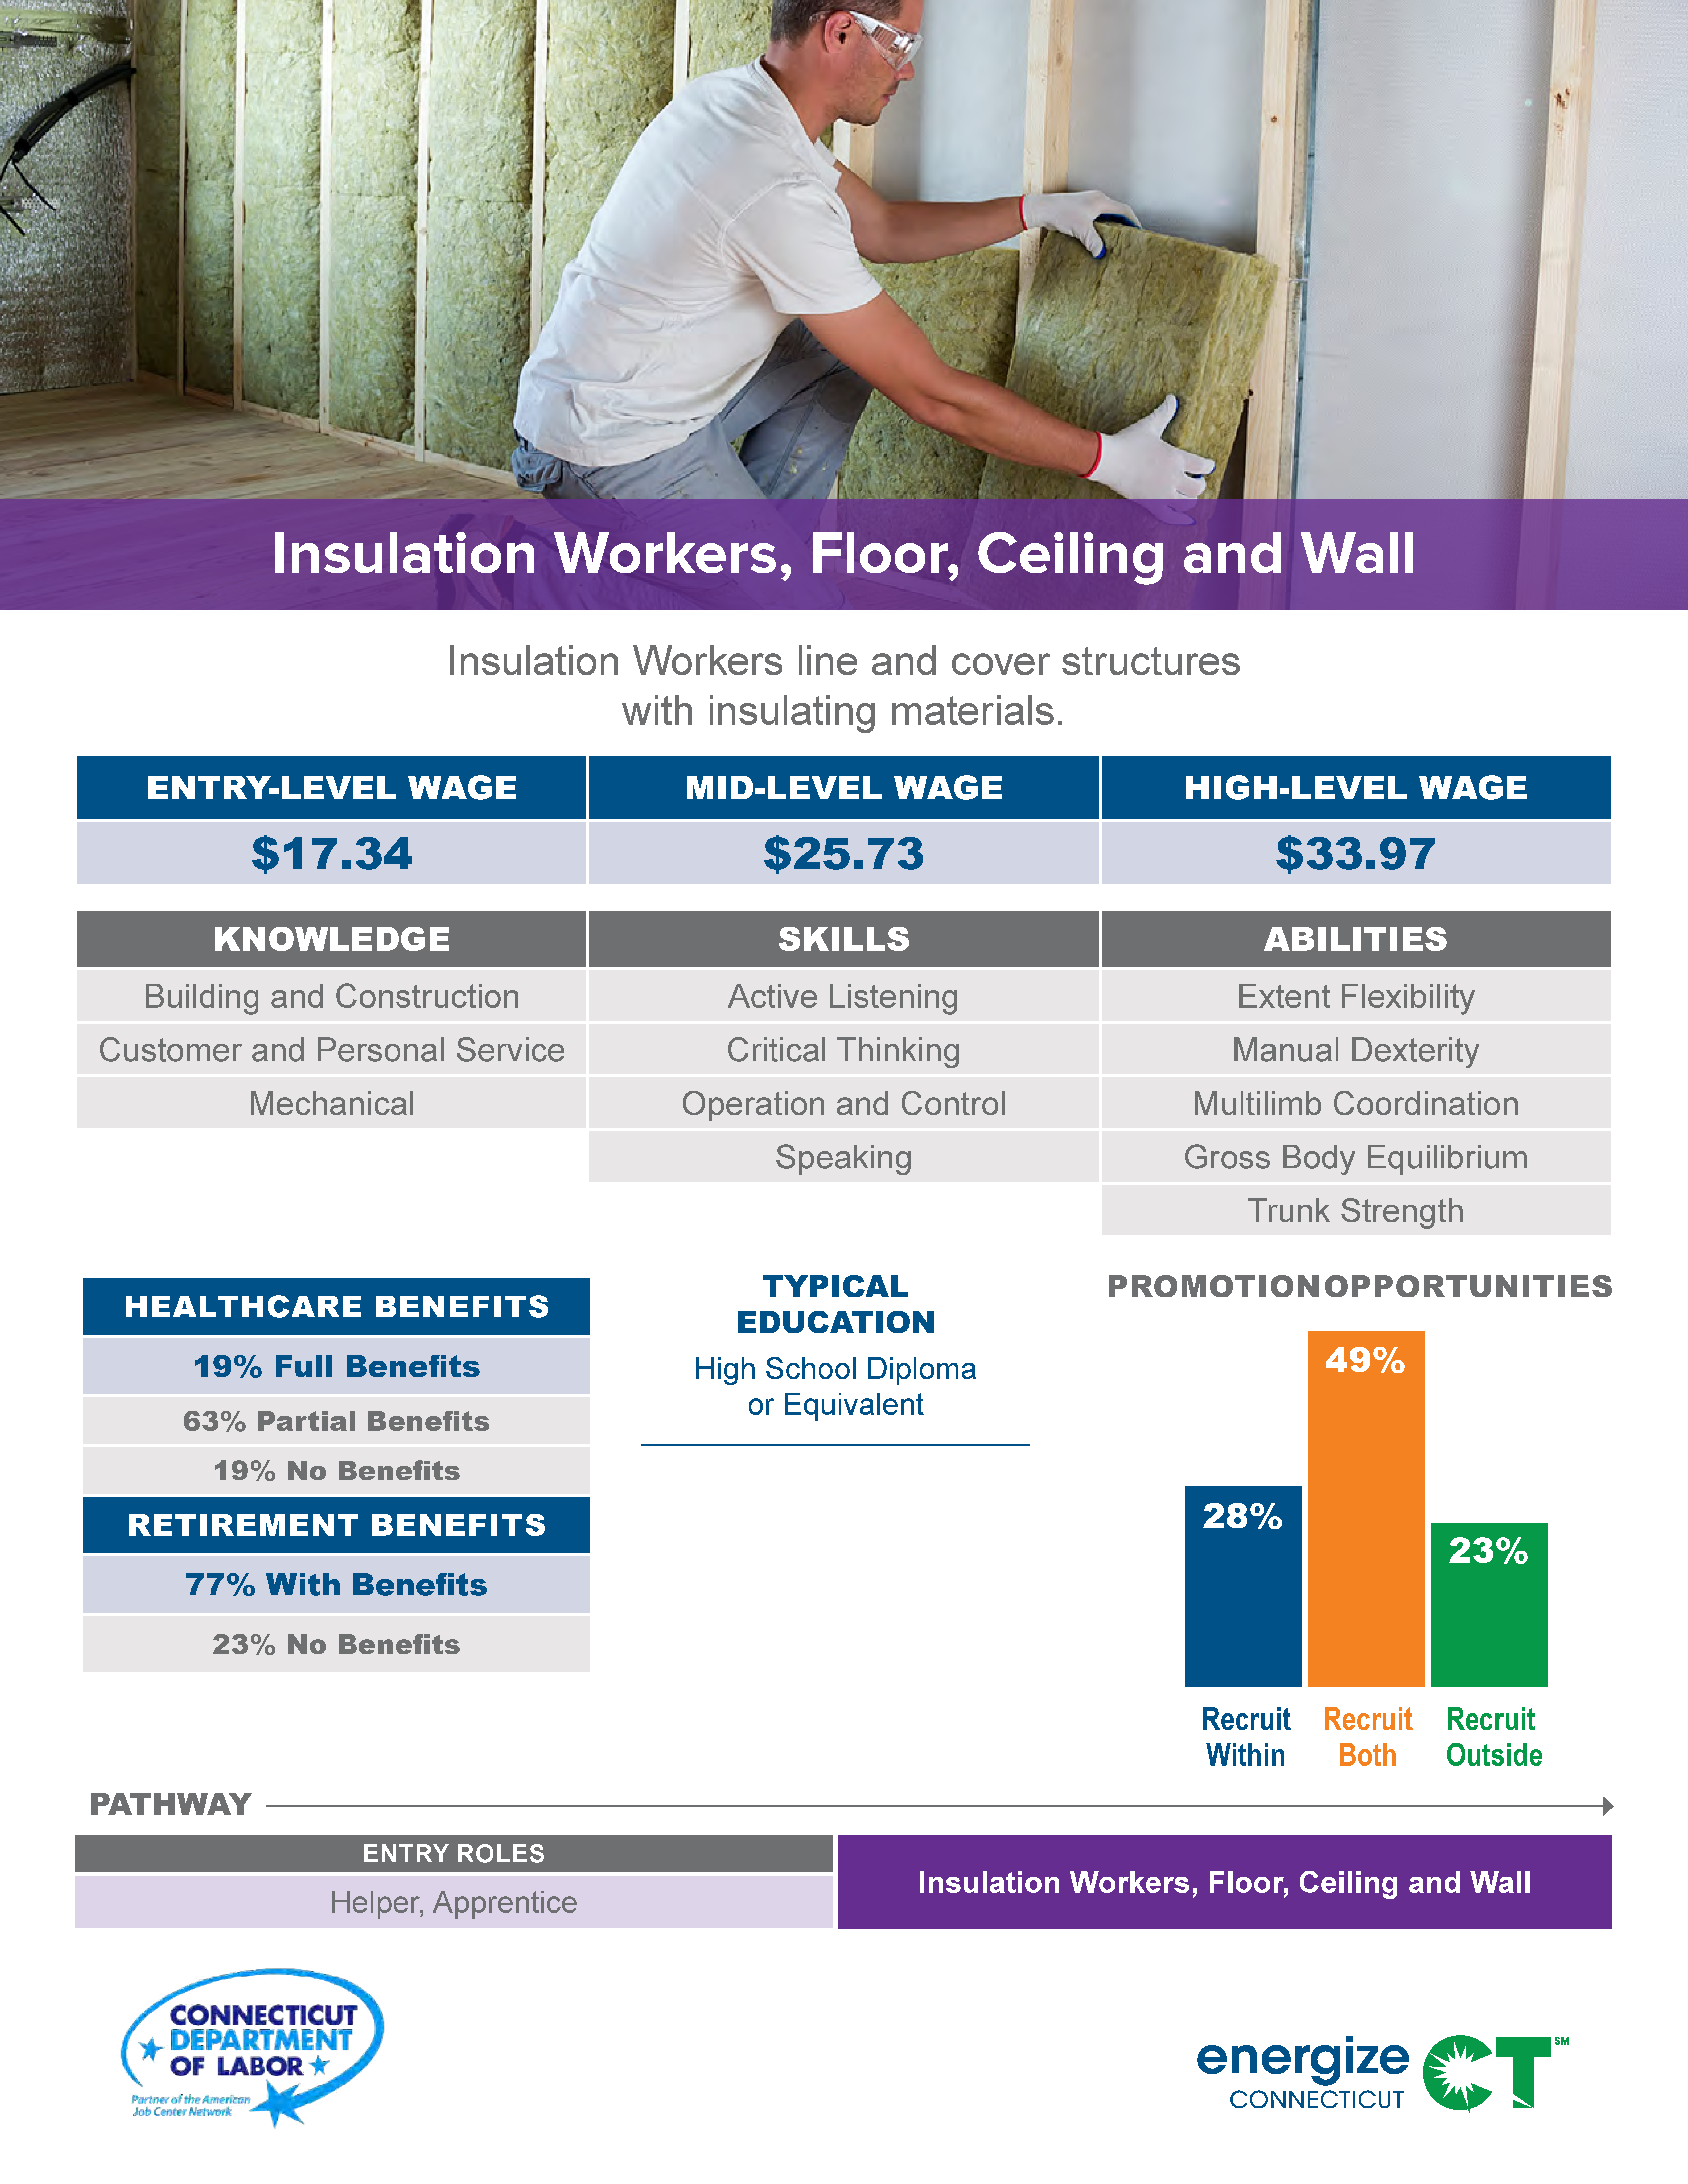 Insulation Workers, Floor, Ceiling and Wall